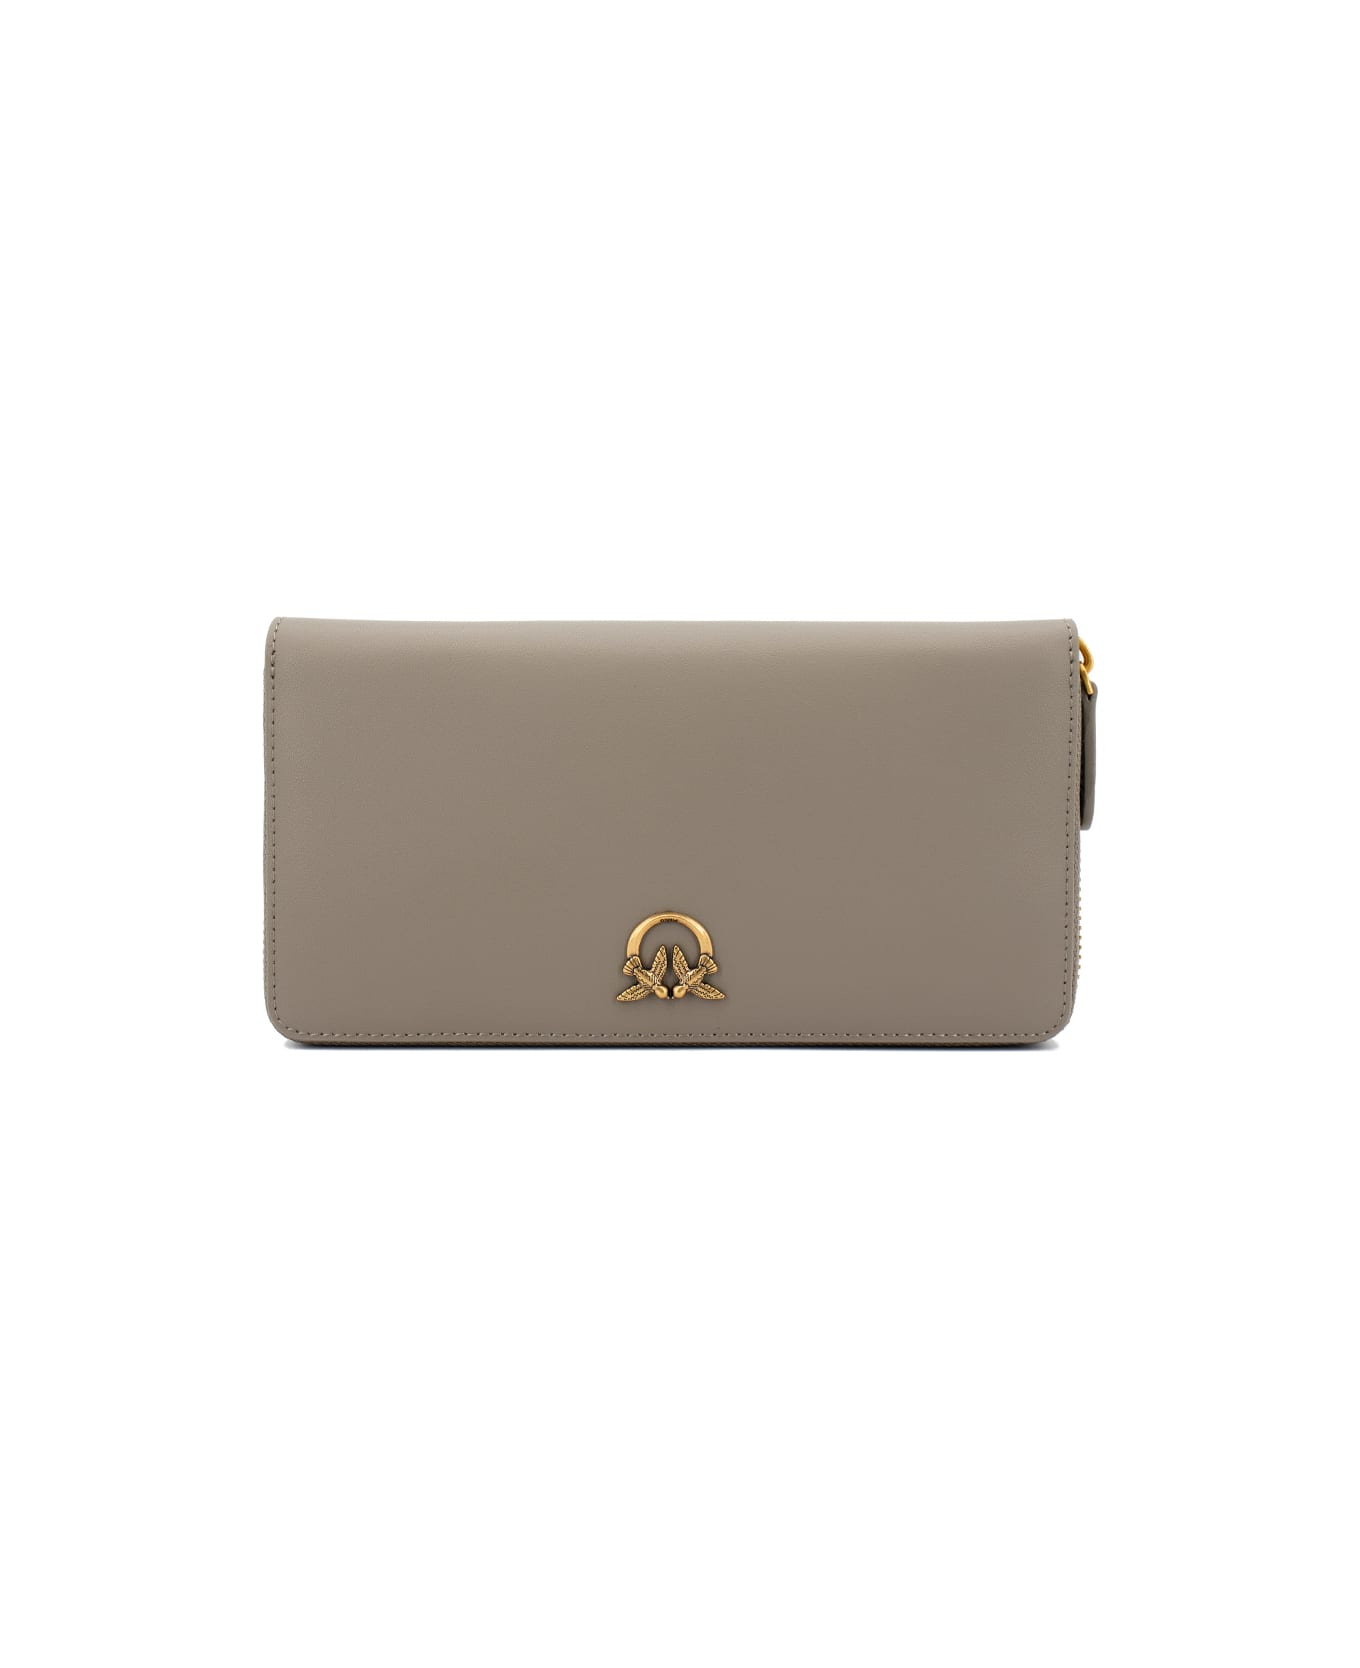 Pinko Wallet With Logo - NOCE ANTIQUE GOLD 財布